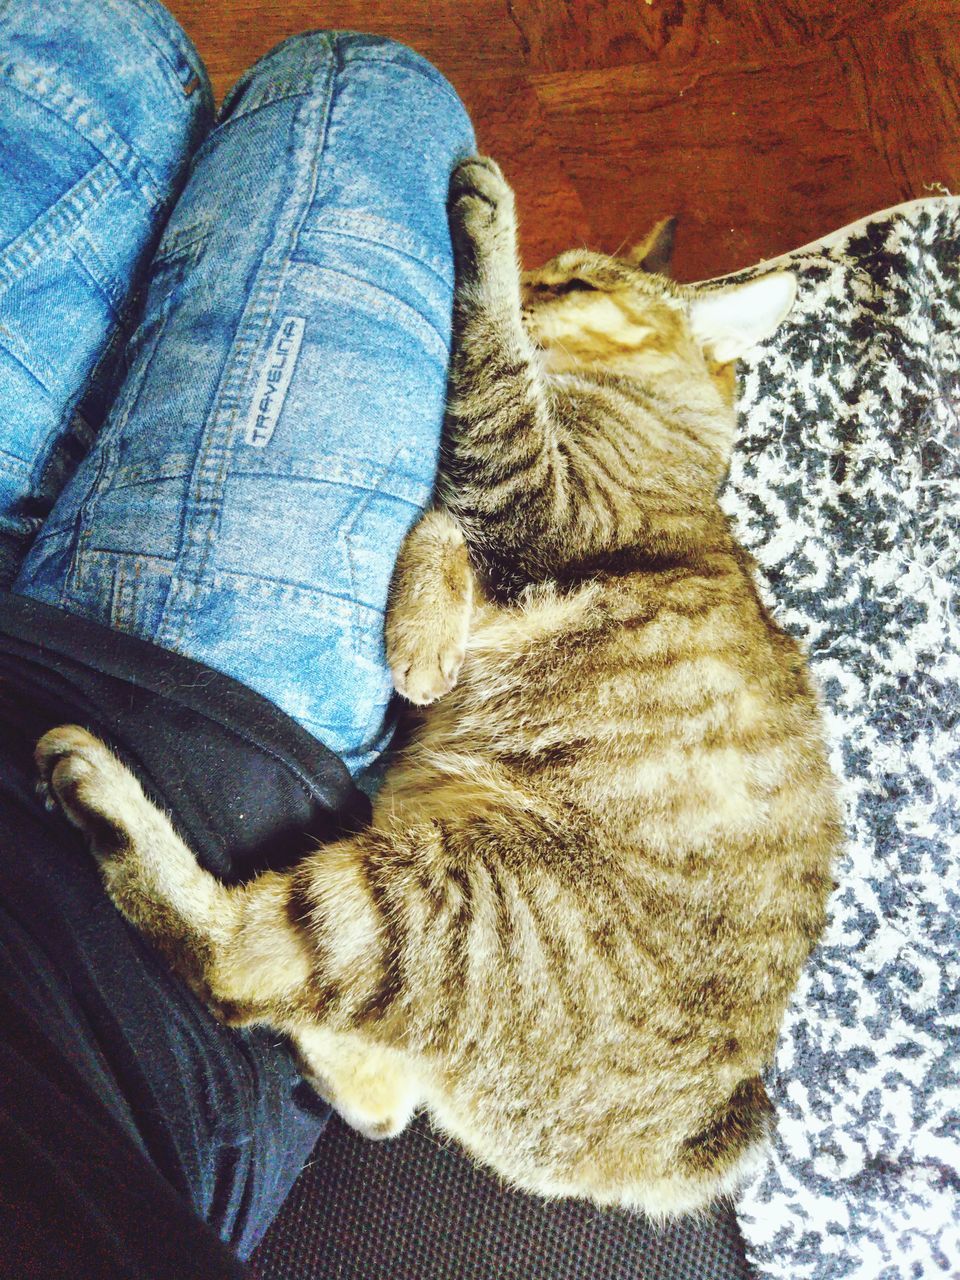 cat, pets, domestic, domestic cat, feline, animal themes, animal, domestic animals, one animal, mammal, vertebrate, relaxation, indoors, human leg, high angle view, casual clothing, human body part, low section, jeans, one person, body part, whisker, pet owner, cozy